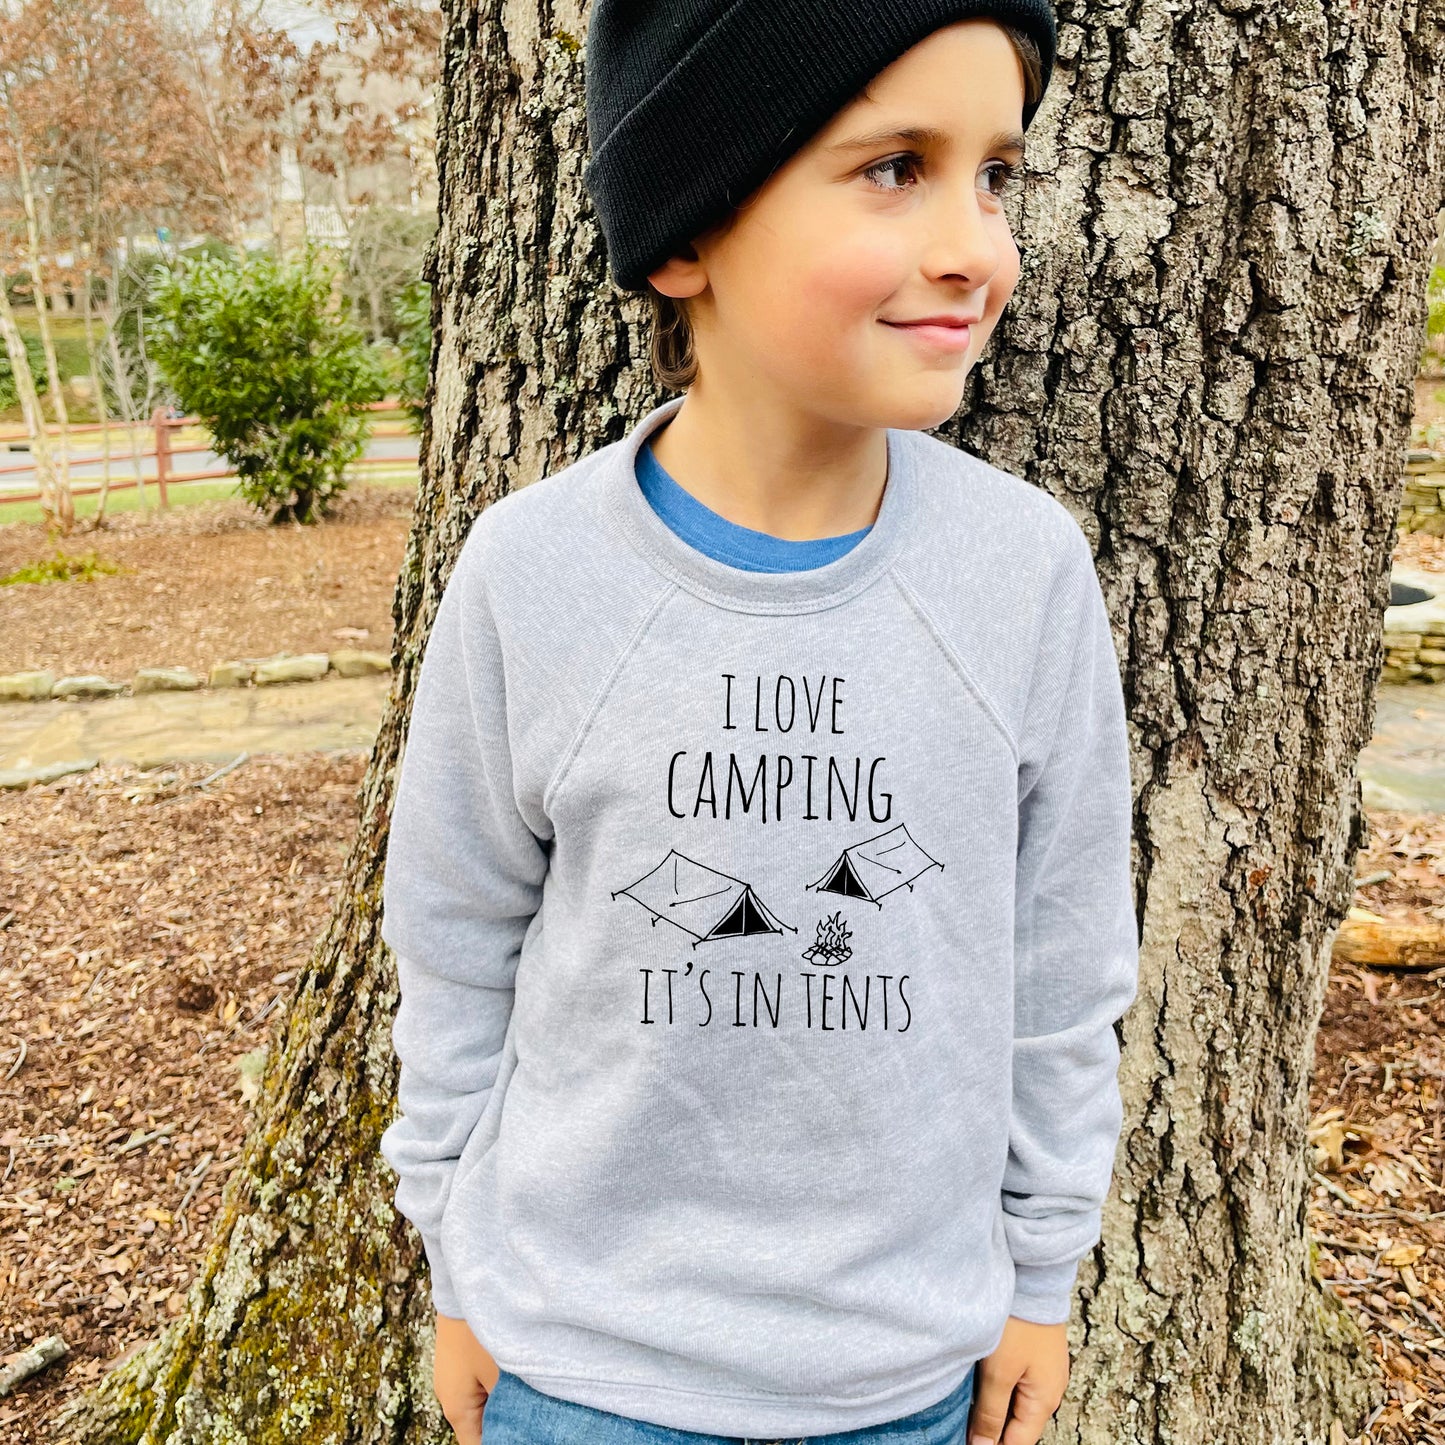 I Love Camping, It's In Tents - Kid's Sweatshirt - Heather Gray or Mauve